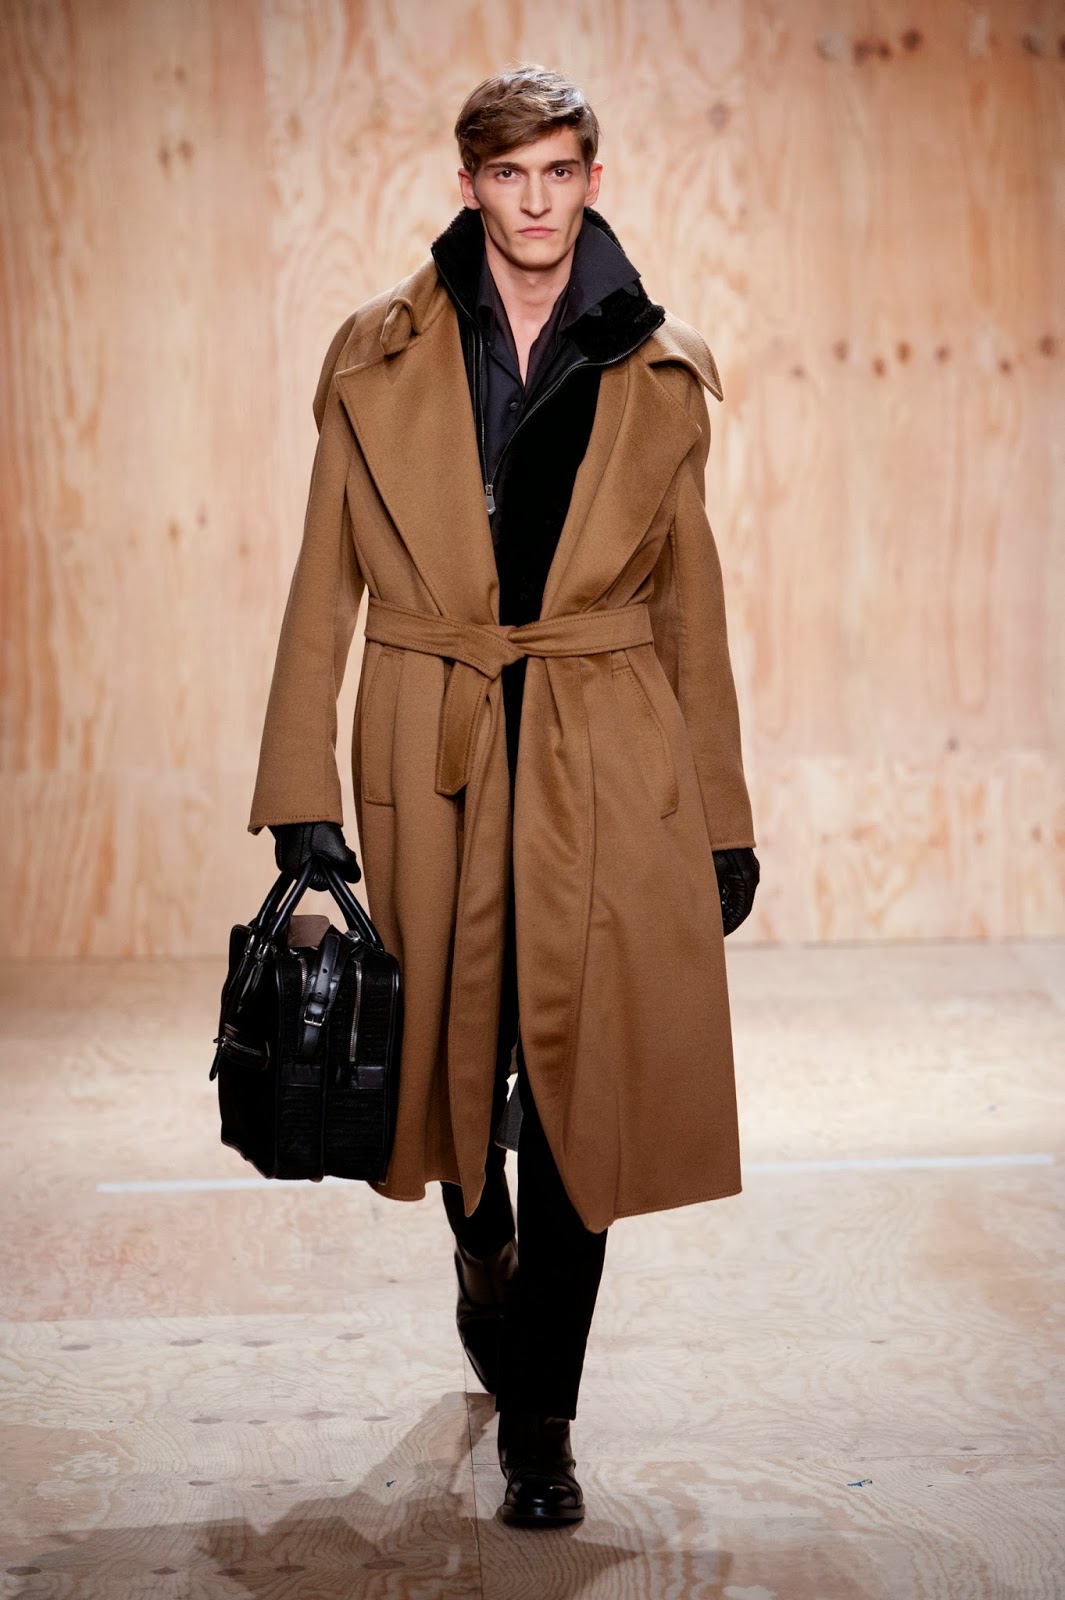 Fashion on the Couch: Berluti Fall/Winter 2014/2015 Runway Show